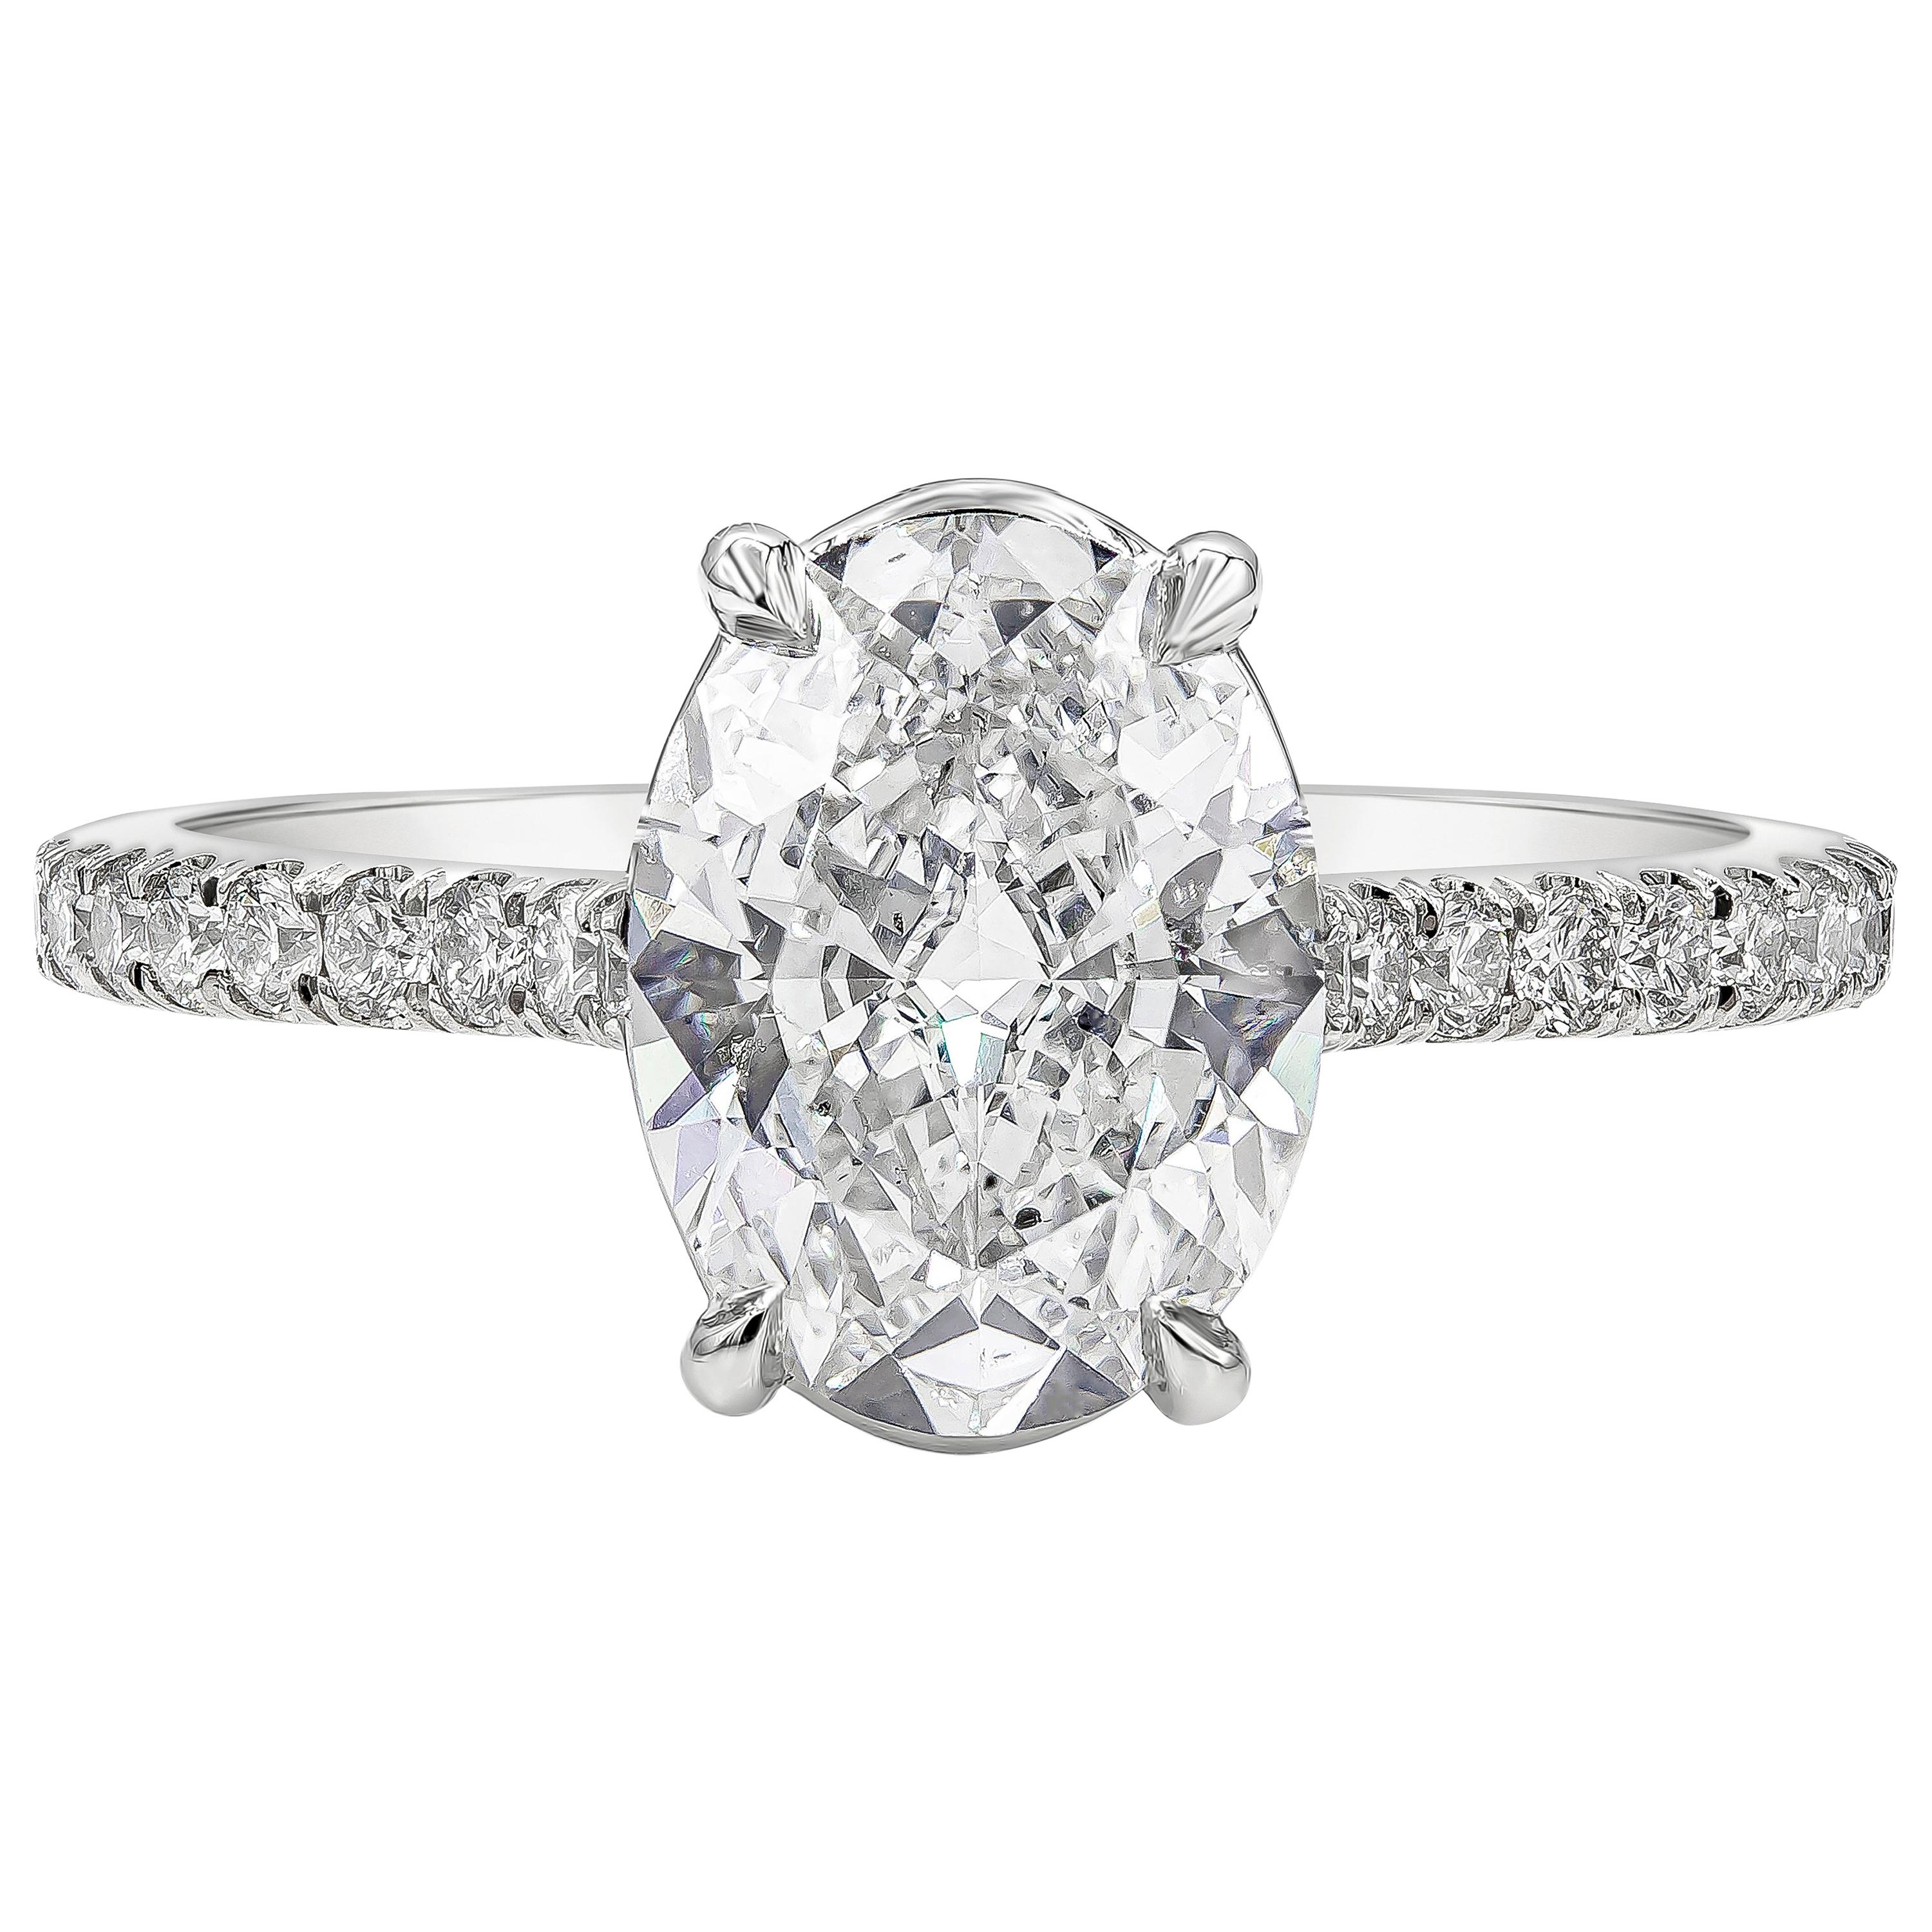 GIA Certified 2.02 Carat Oval Cut Diamond Engagement Ring in Platinum